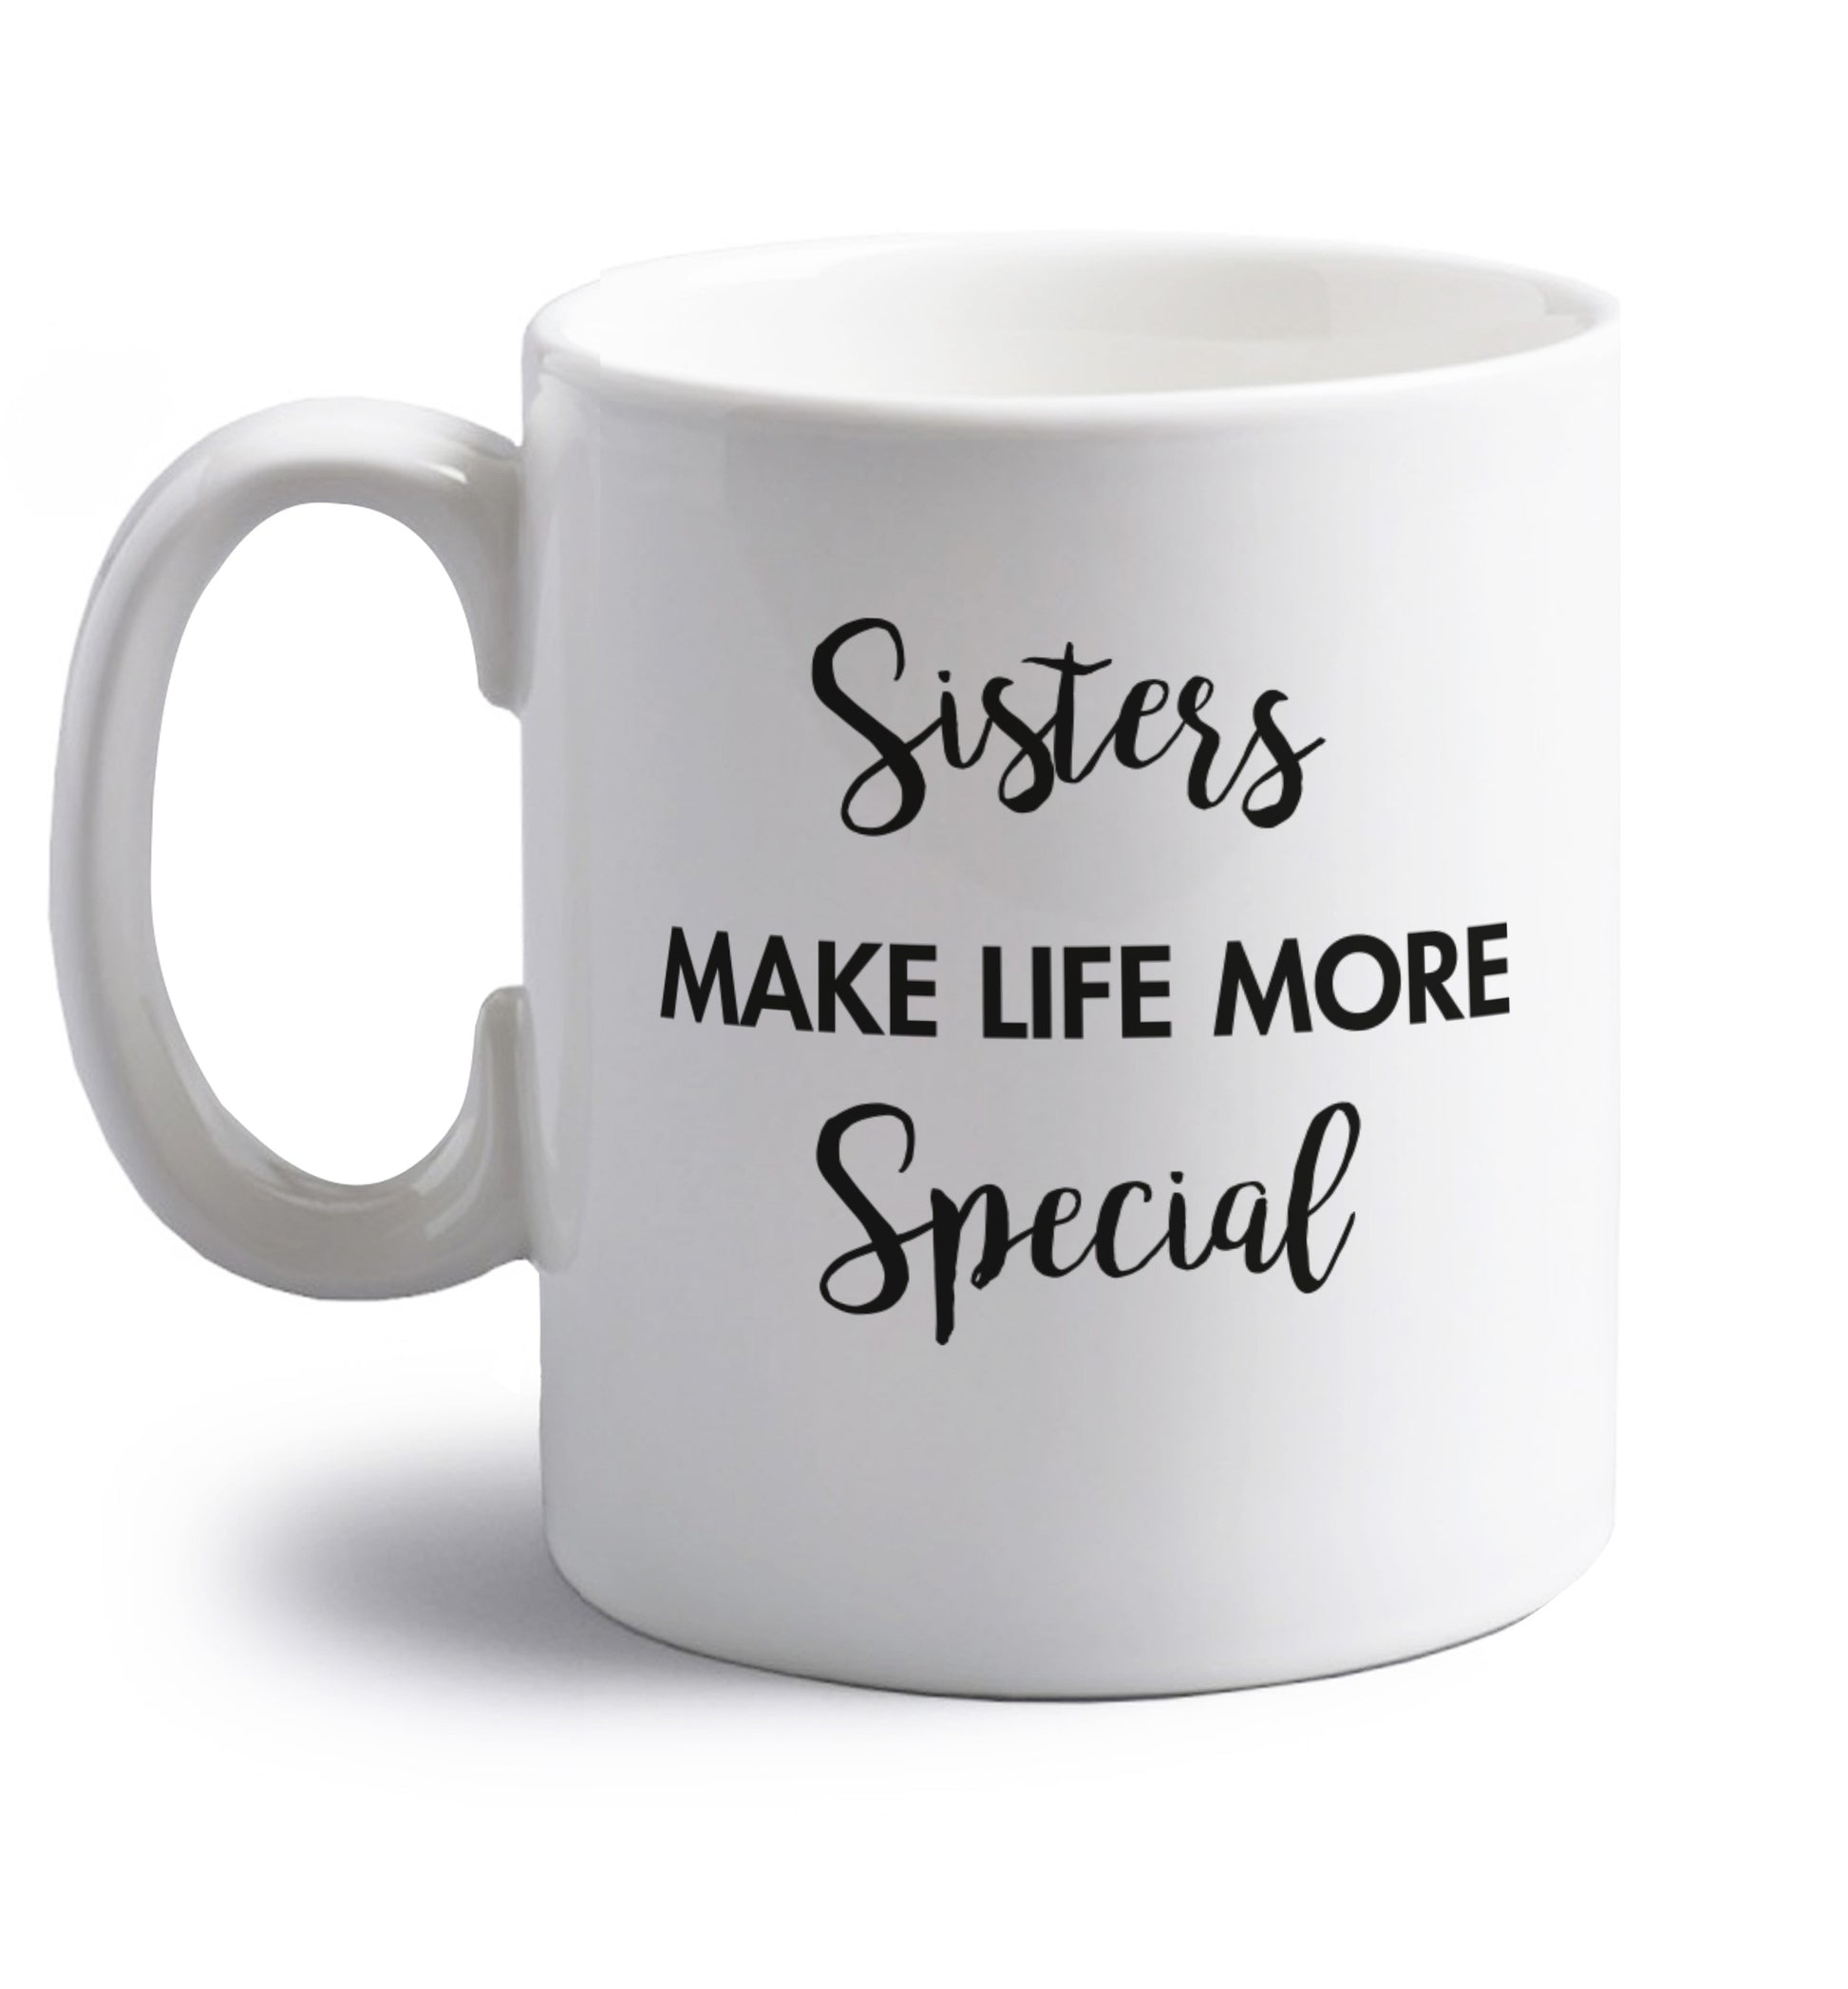 Sisters make life more special right handed white ceramic mug 